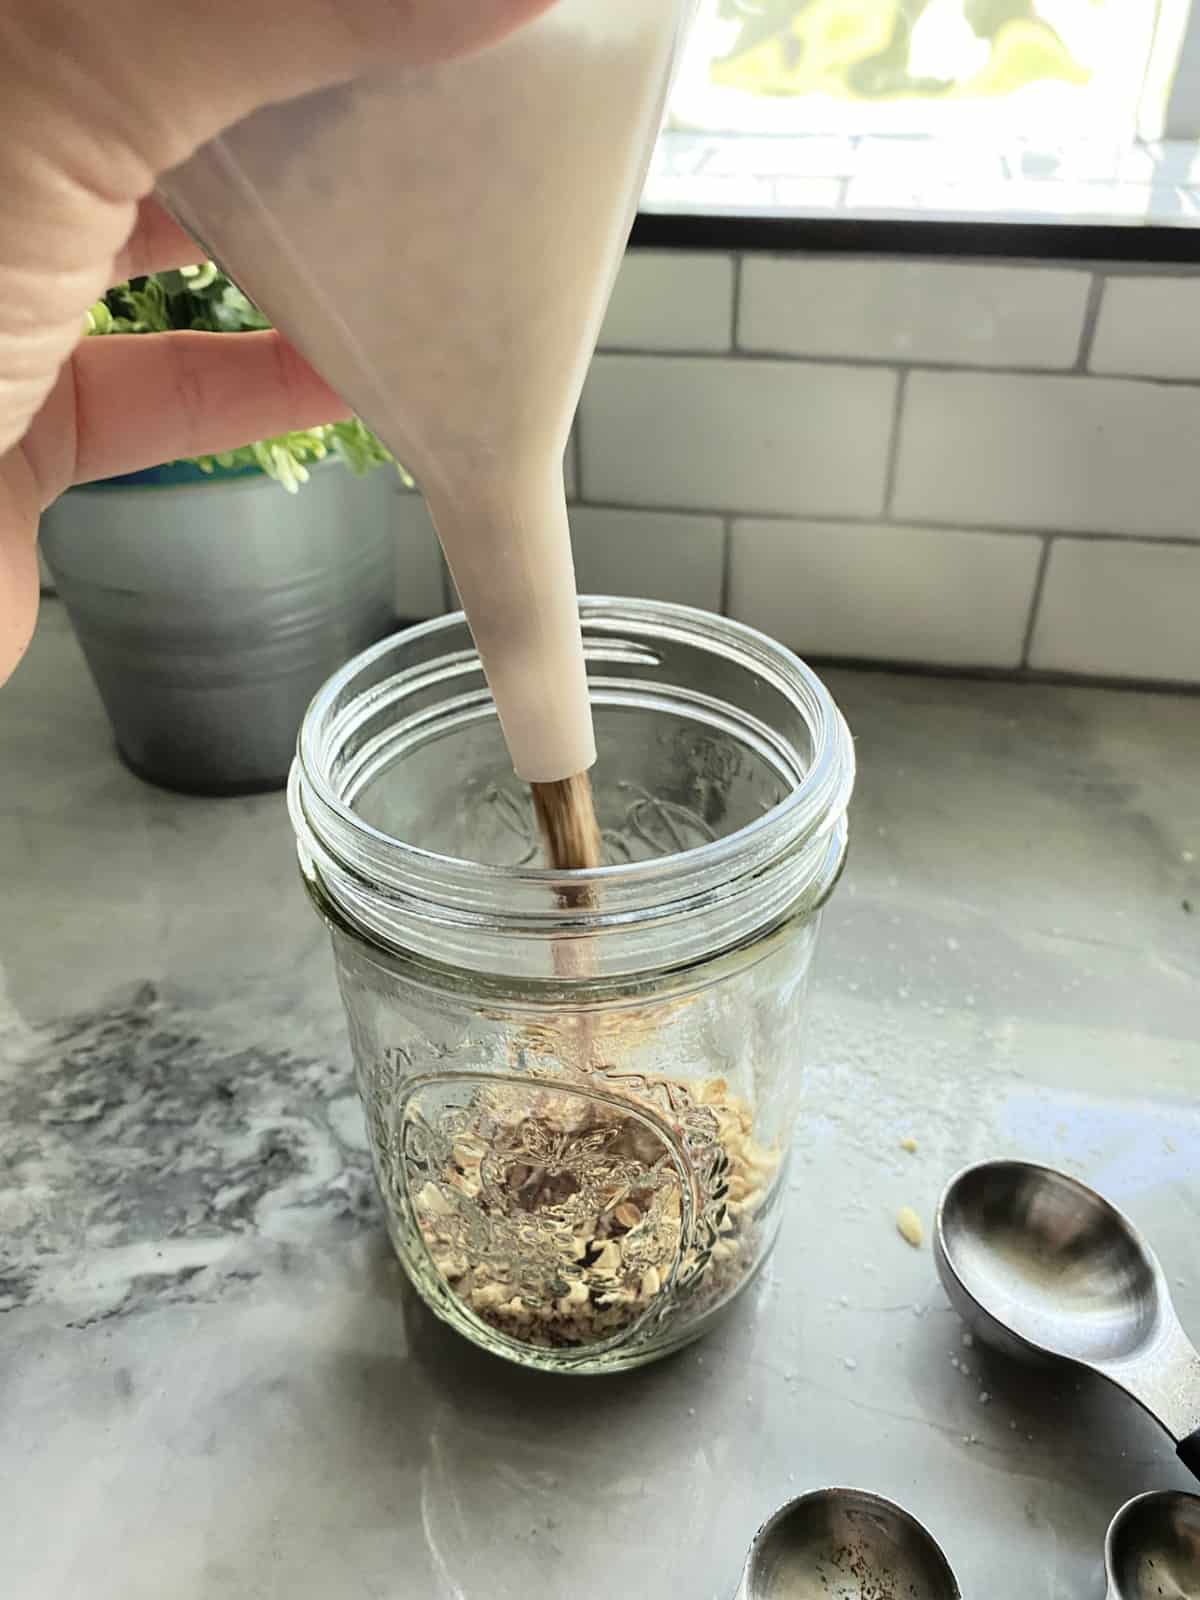 Hand holding a funnel that is pouring spices into a mason jar.